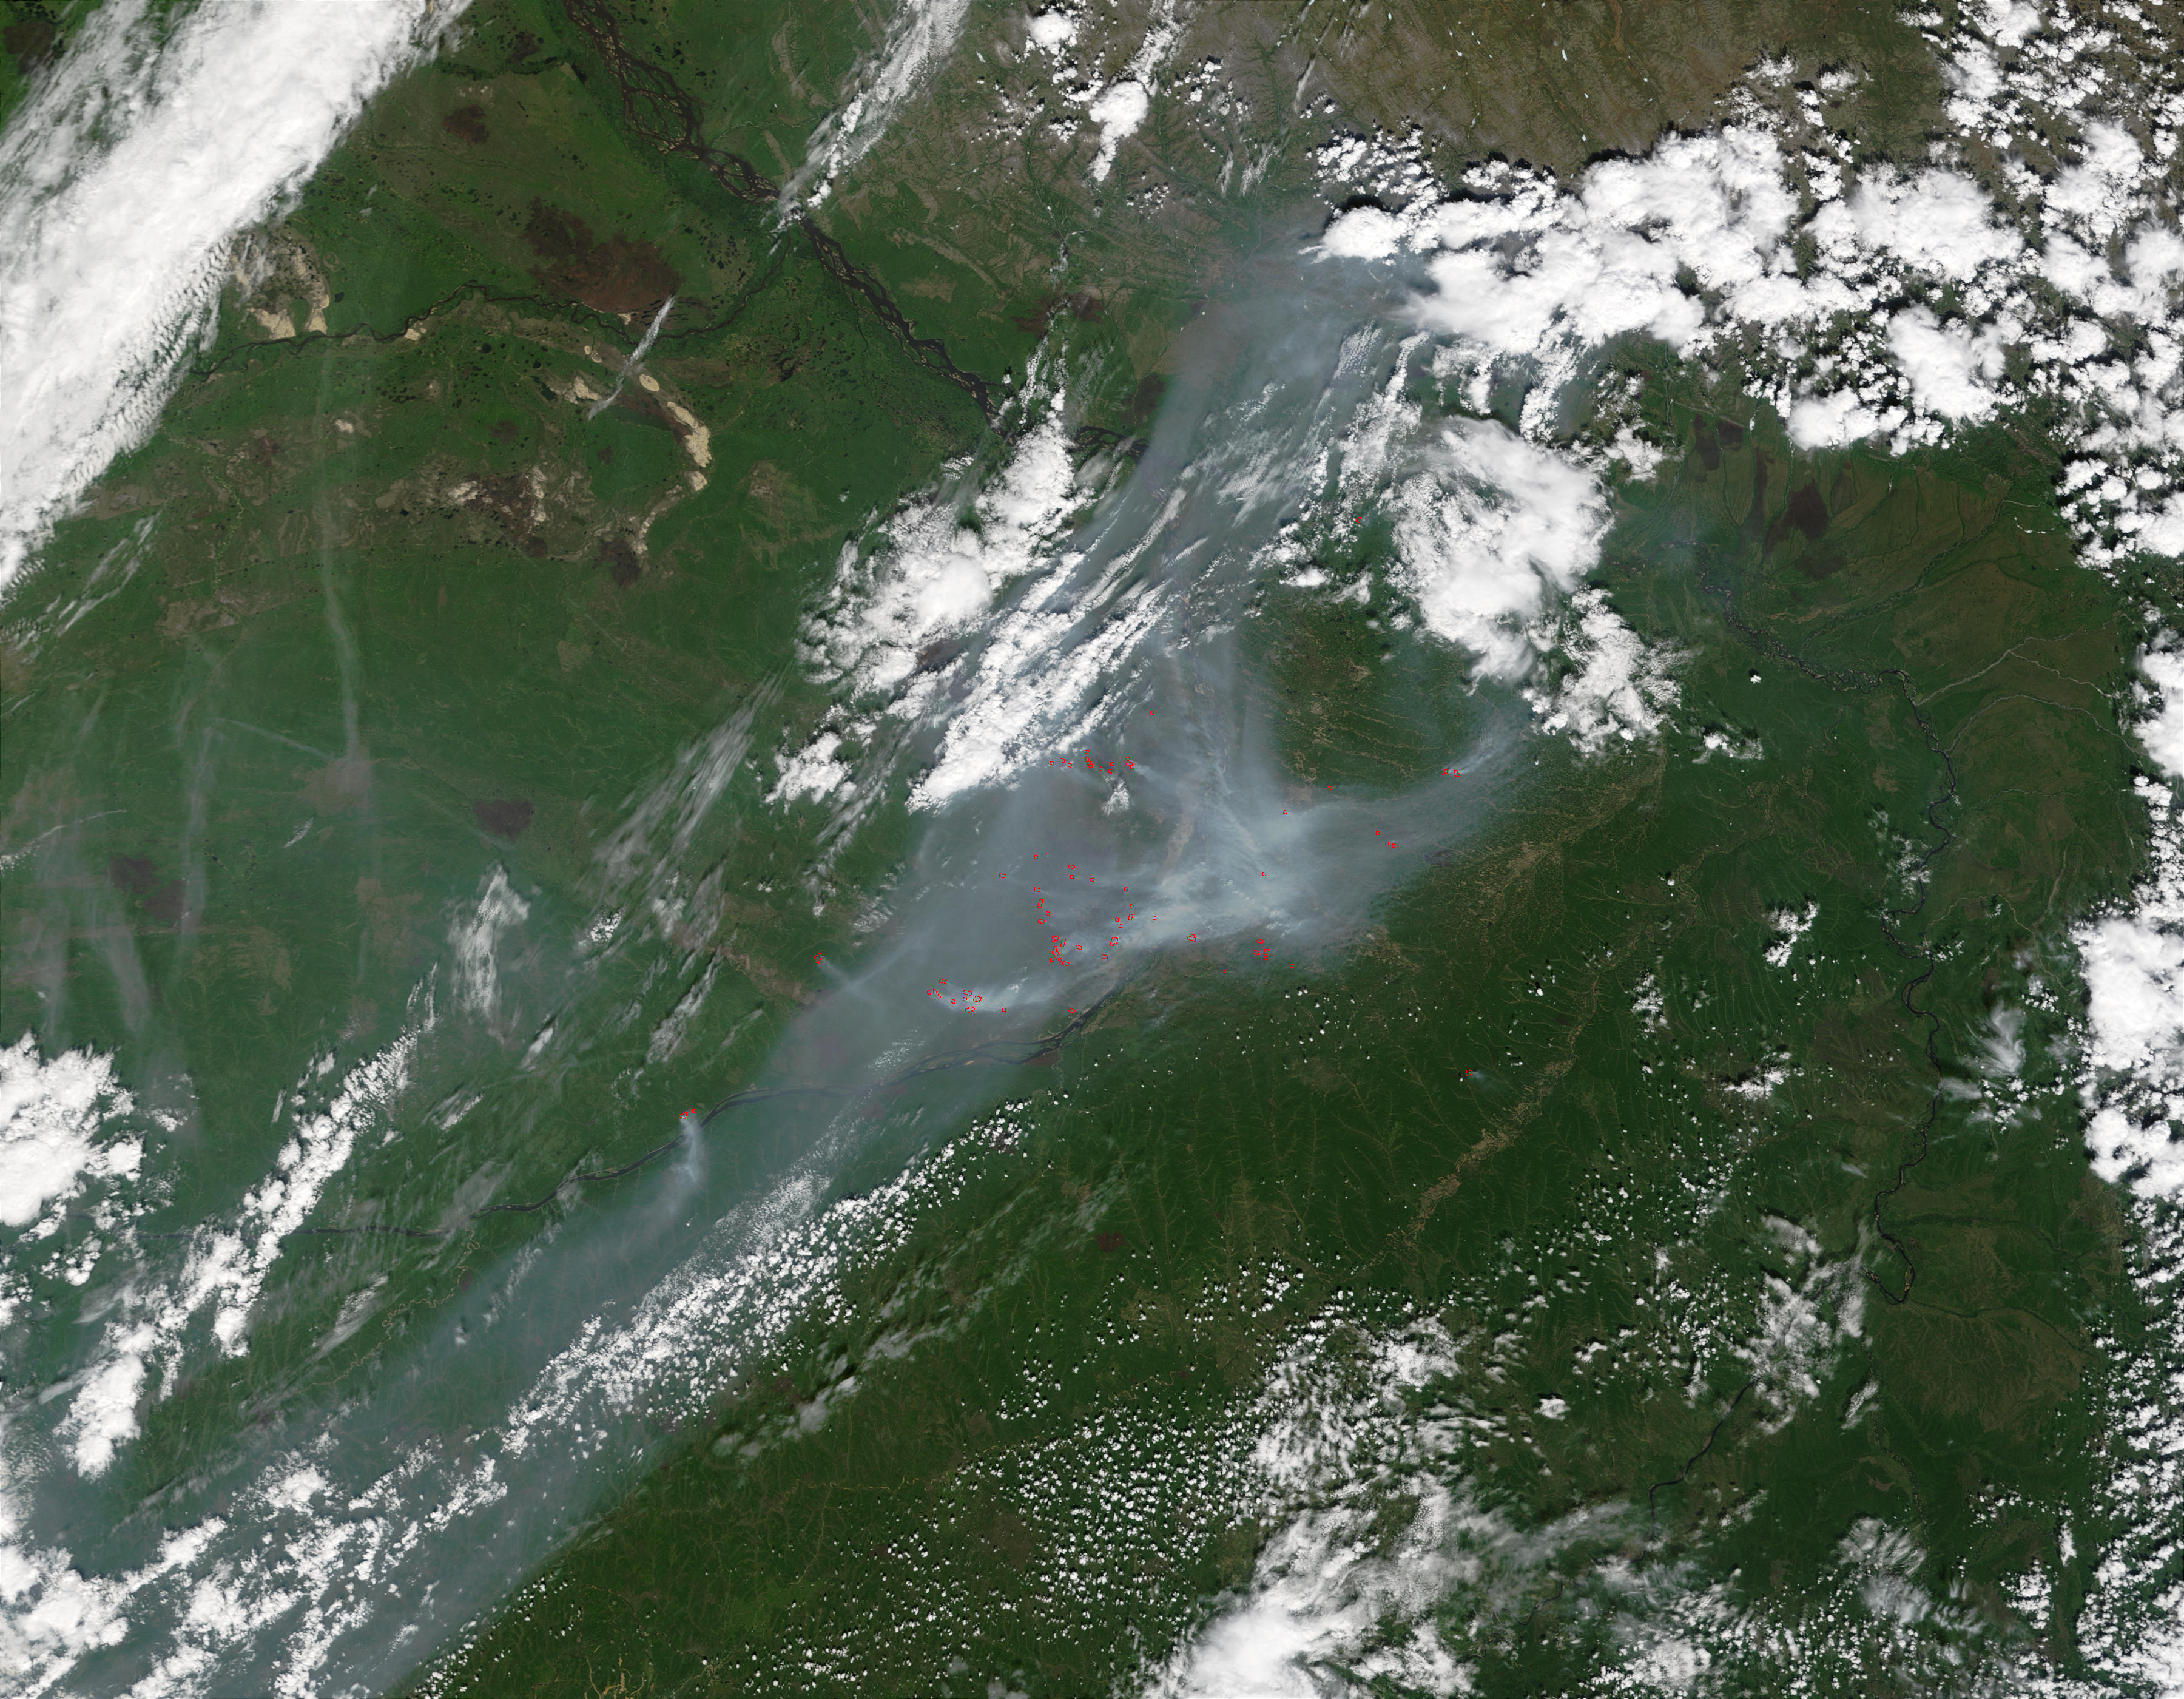 Fires near Yakutsk, Russia - related image preview